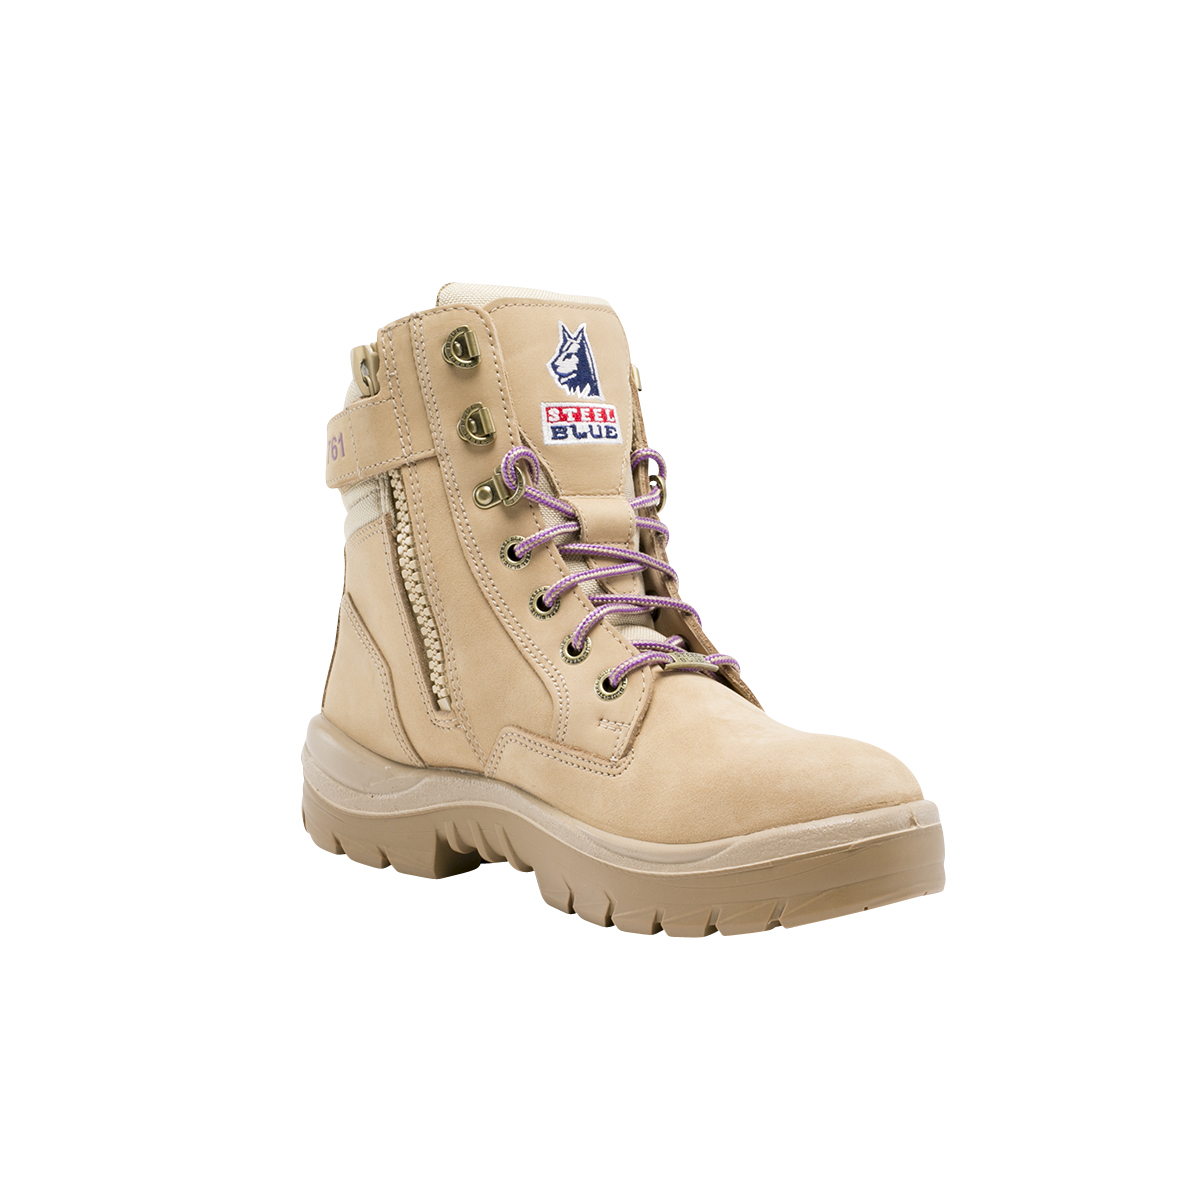 BOOT LADIES SOUTHERN X ZIP SAND S10 -NITRILE SOLE